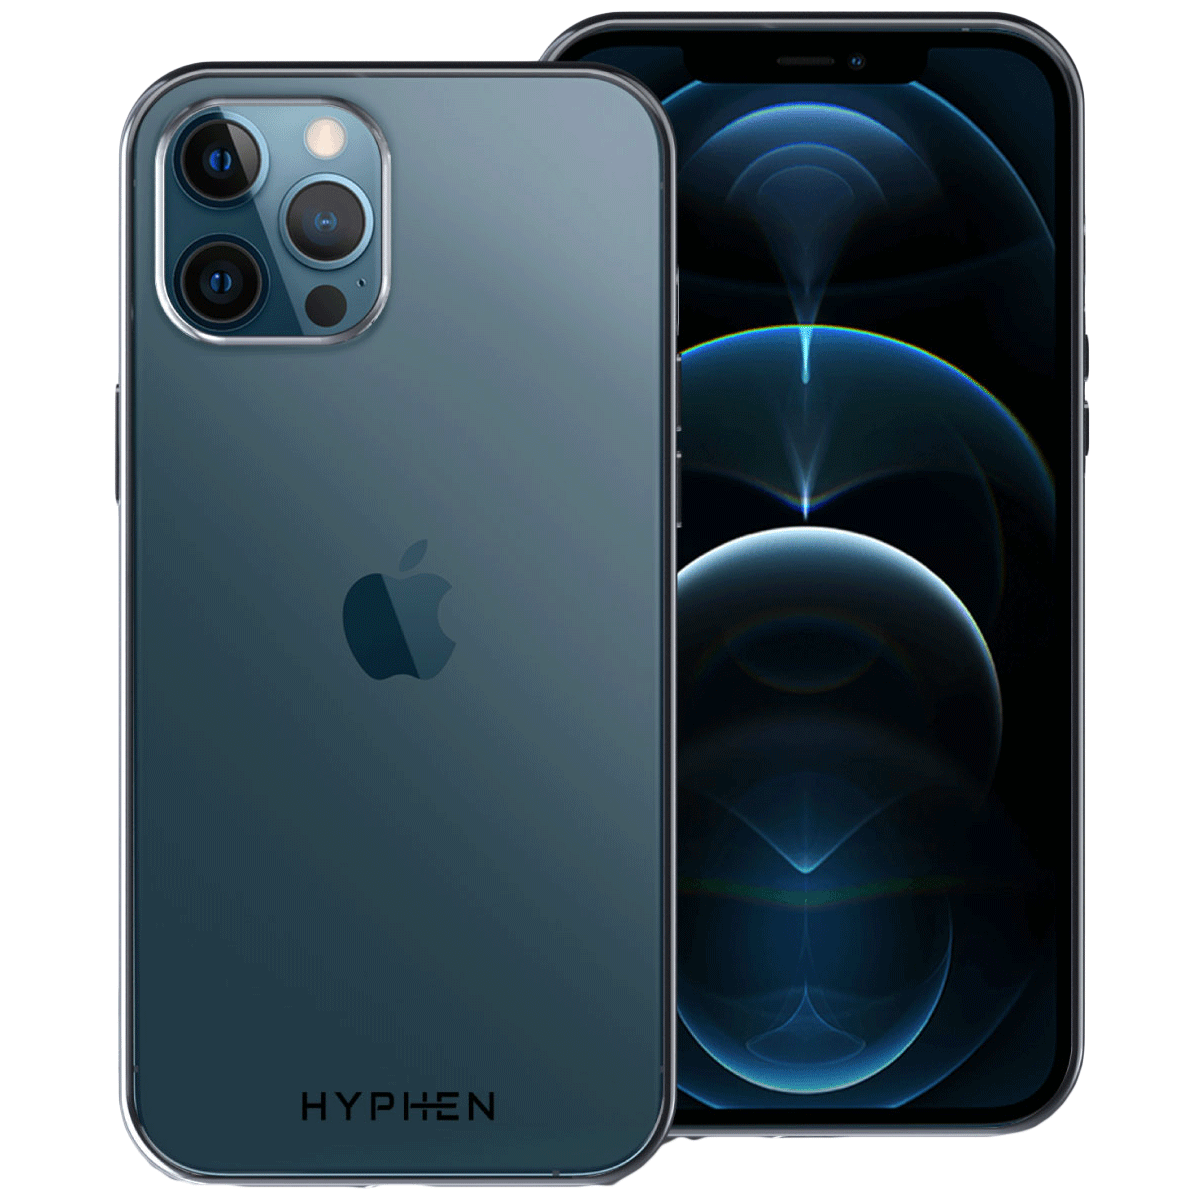 Hyphen Frame TPU Back Case For iPhone 12 Pro Max (Compact, Flexible and Slim Design, HPC-FXII679002, Silver)_1